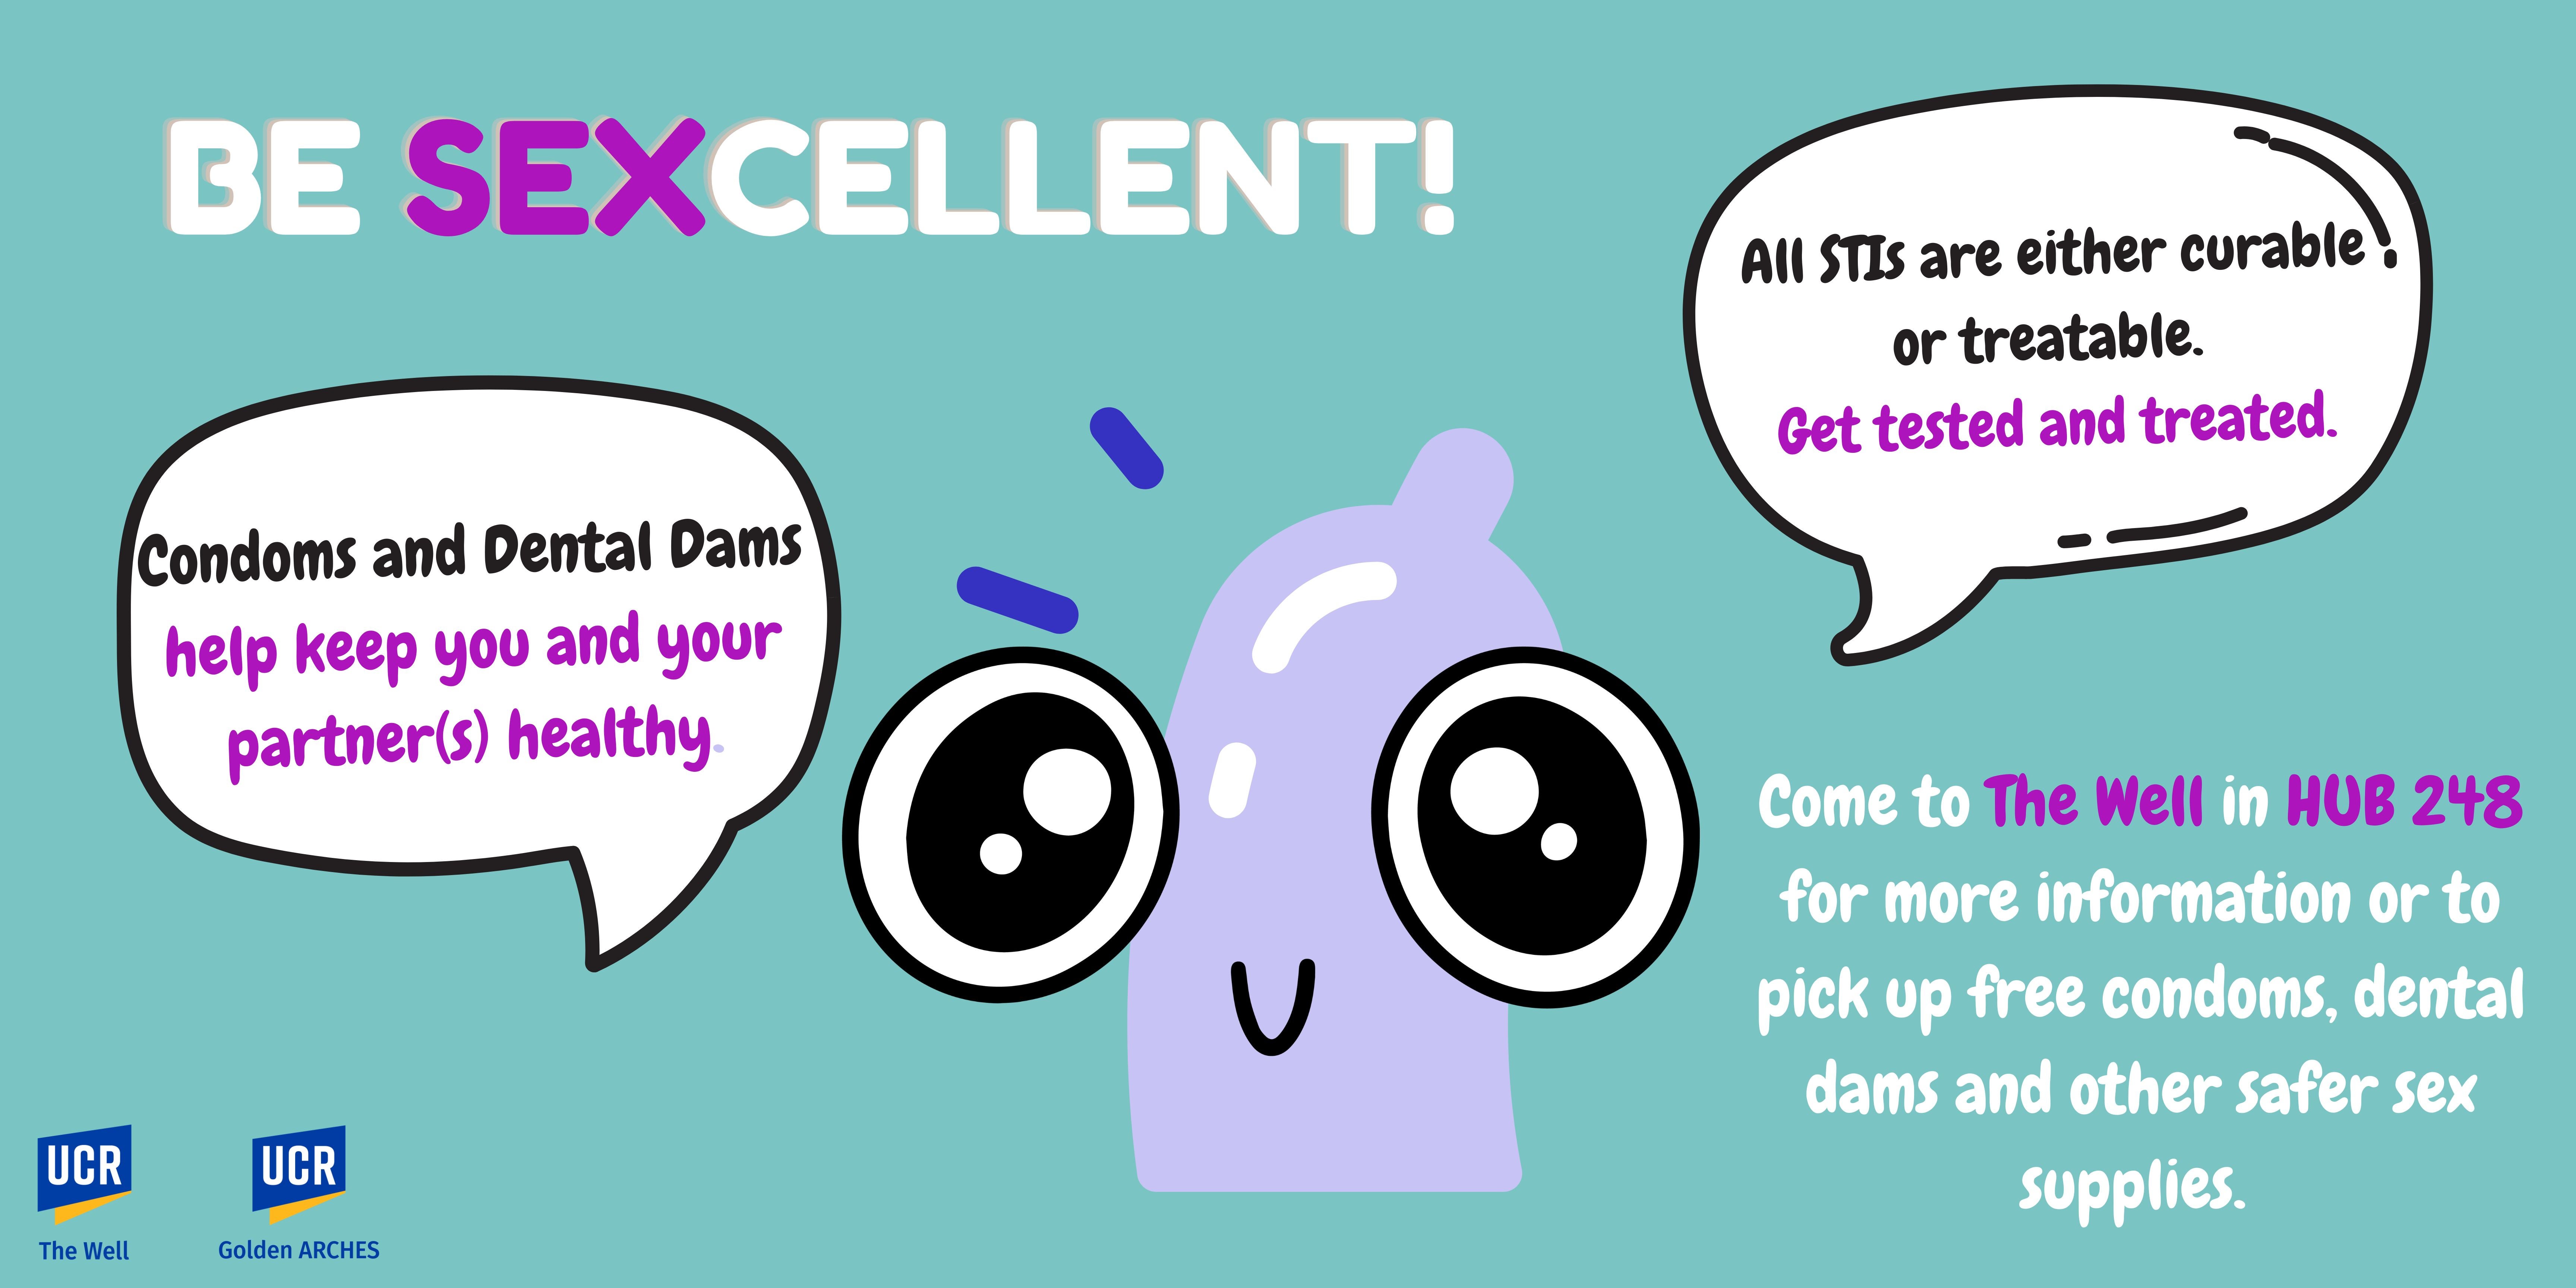 Cameron the condom with big eyes and conversation bubbles. be sexcellent! Condoms and dental dams help keep you and your partner's healthy. All STIs are curable or treatable. Get tested or get treated. Come to The Well in HUB 248 for more information or to pick up free condoms, dental dams and other safer sex supplies.